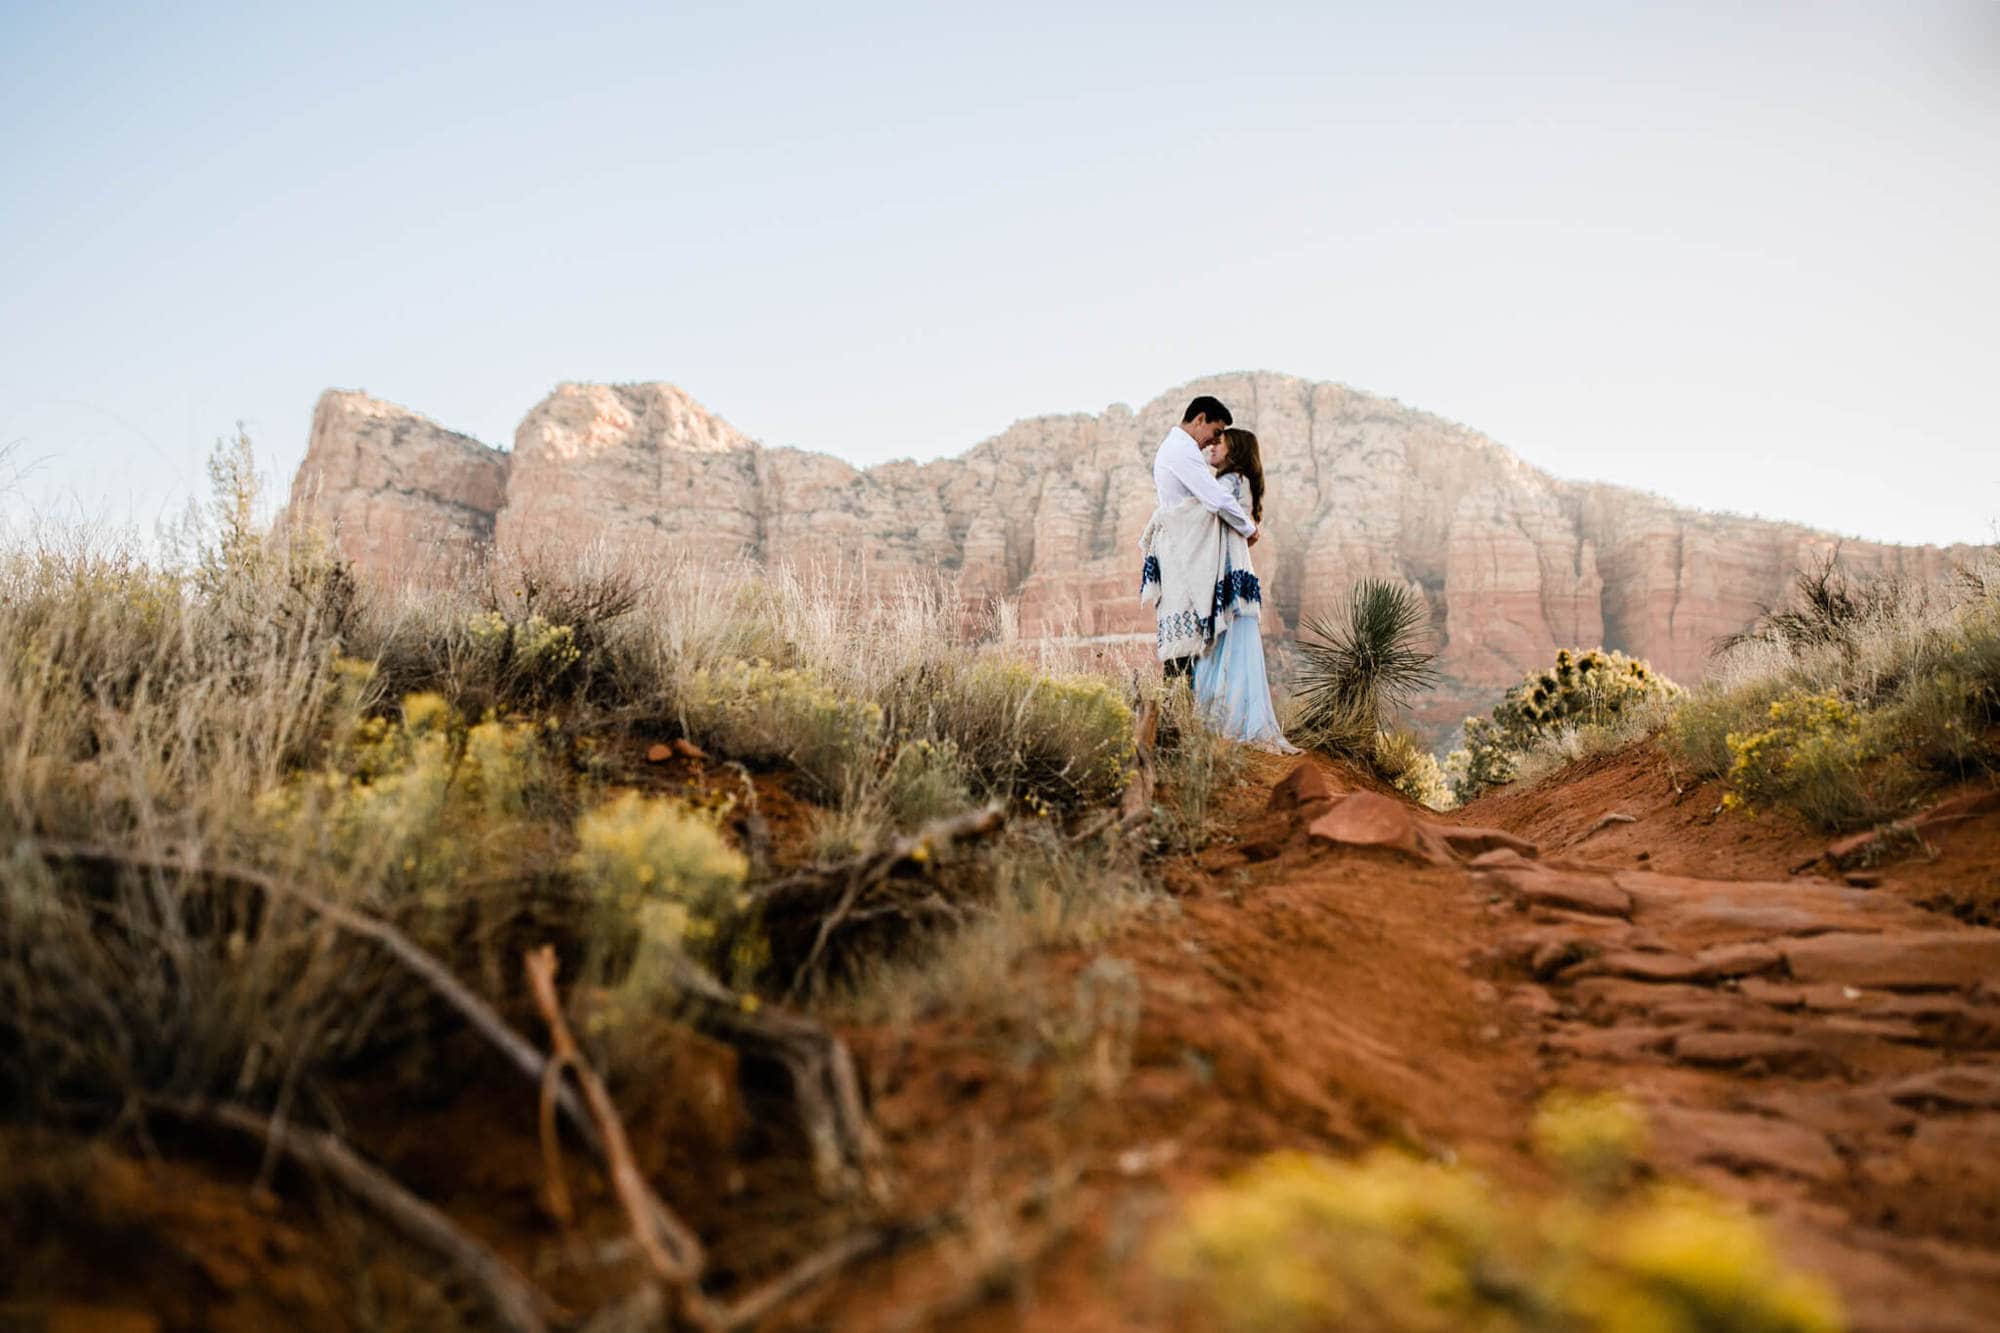 Framed by the epic red mountains behind them, the bride and groom hug in a field of yellow flowers during their Sedona Adventure Wedding